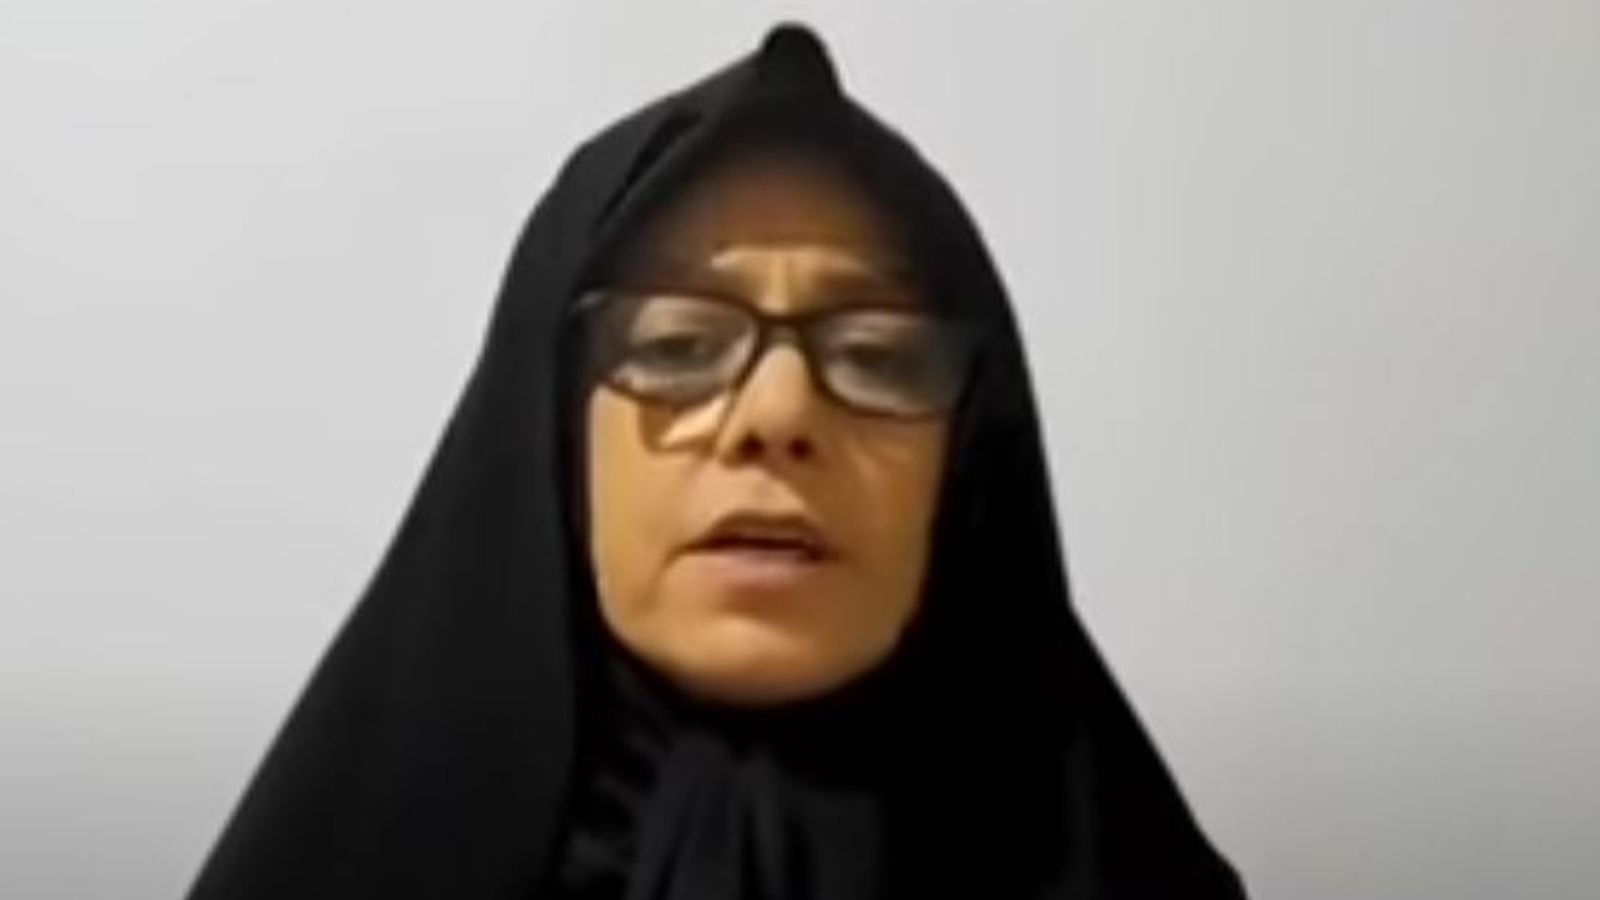 Iran supreme leader's niece calls on governments to cut ties with 'murderous and child-killing regime'